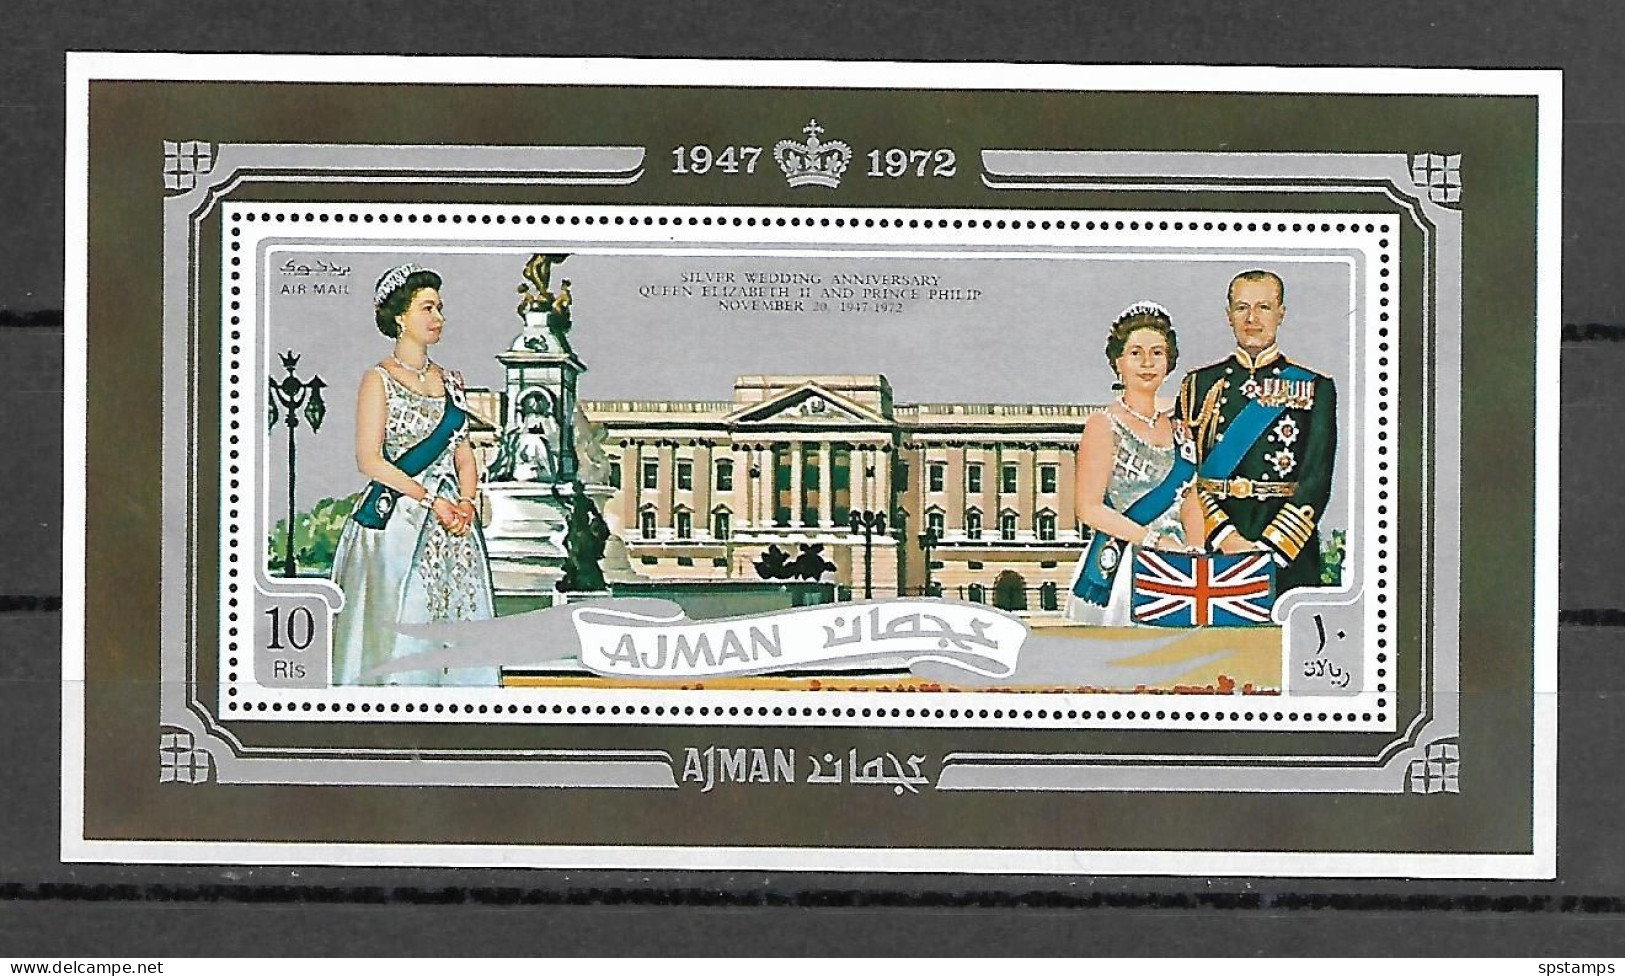 Ajman 1971 The 25th Wedding Anniversary Of Queen Elizabeth II And Prince Philip MS MNH - Familias Reales